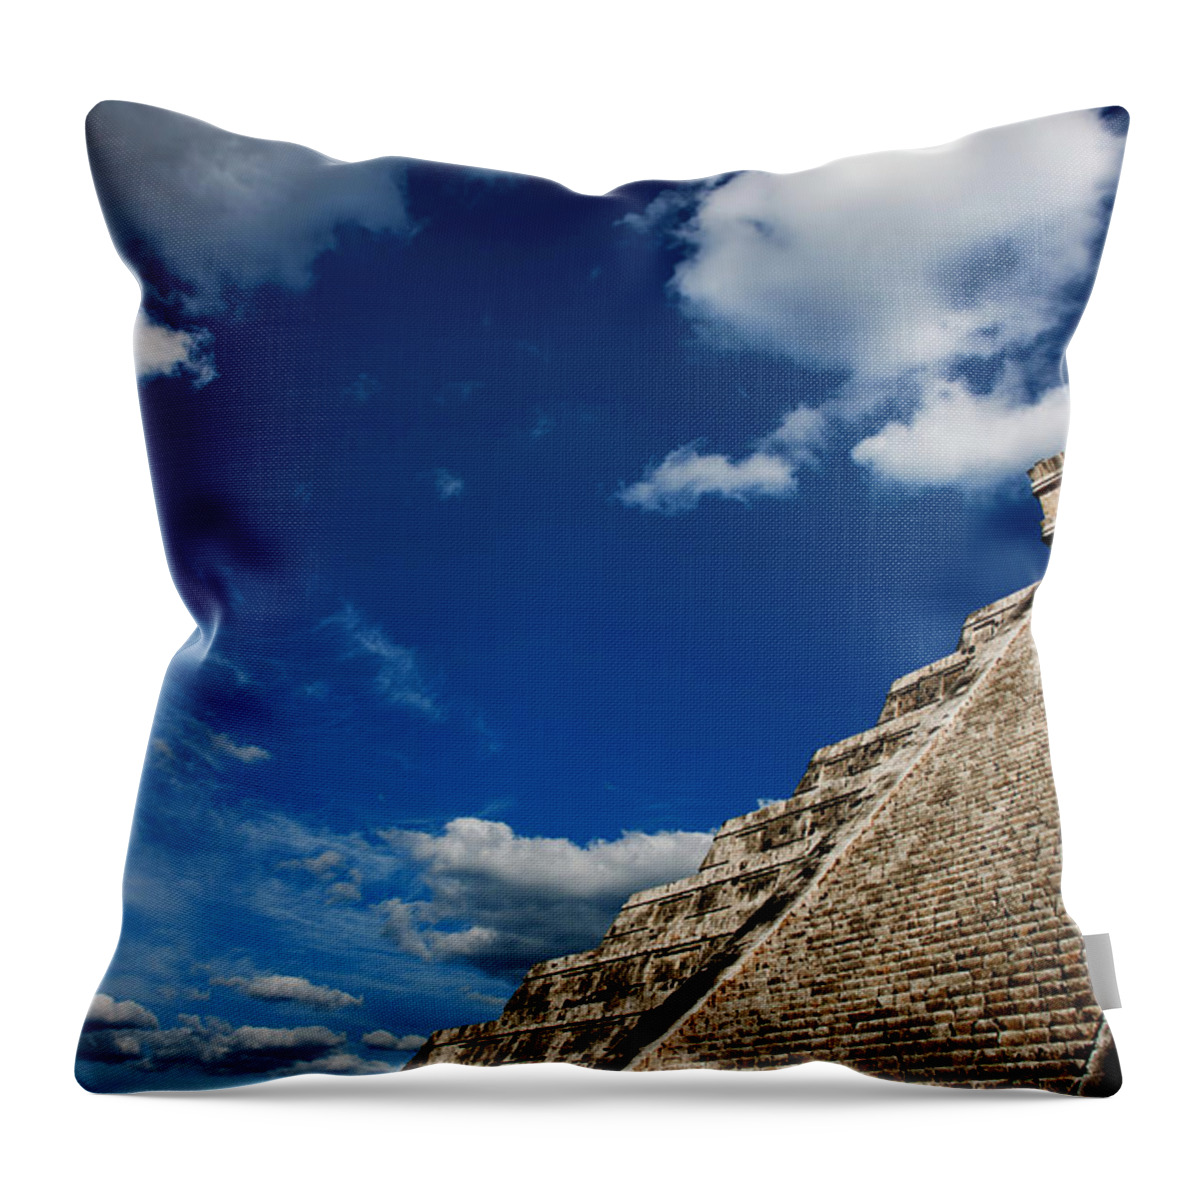 Southern Mexico Throw Pillow featuring the photograph Chichen Itza by Instants